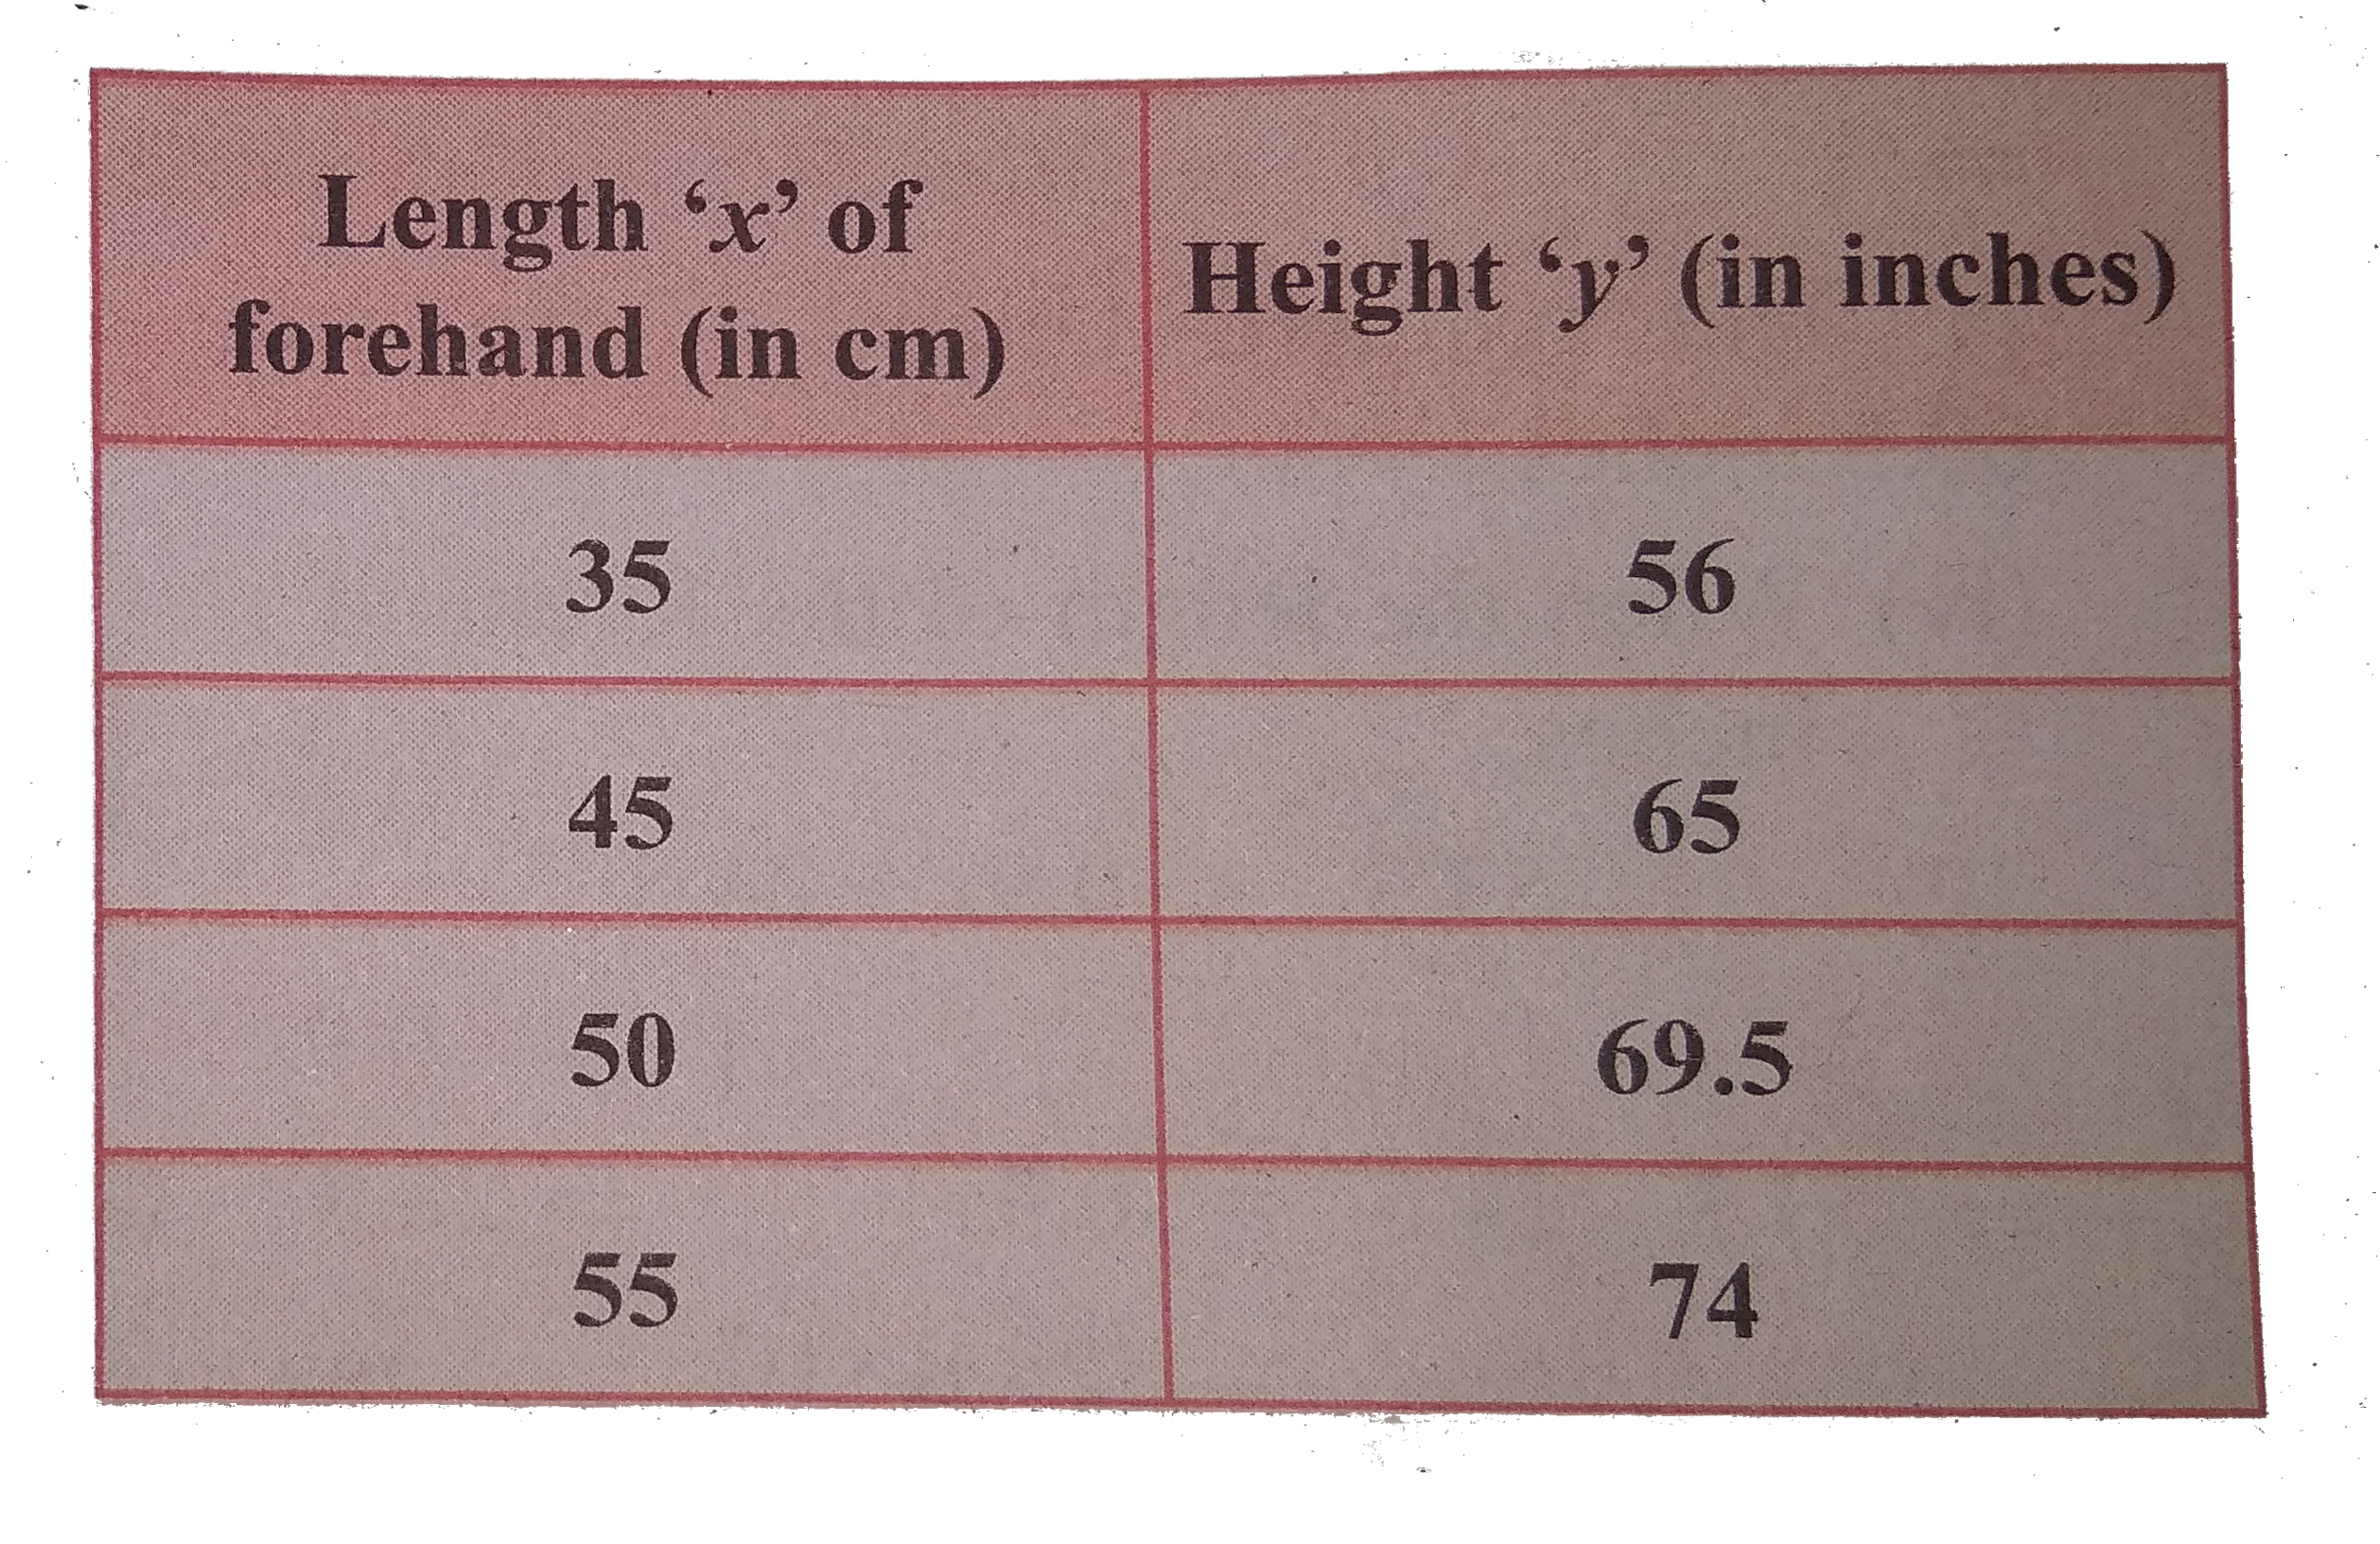 The data in the adjcent table depicts the length of a woman's foreheads and her corresponding height. Based on this data, a student finds a relationship between the height (y) and the forehead length (x) as y=ax+b, where a, b are constants.     Find the length of forehead of a woman if her height is 53.3 inches.